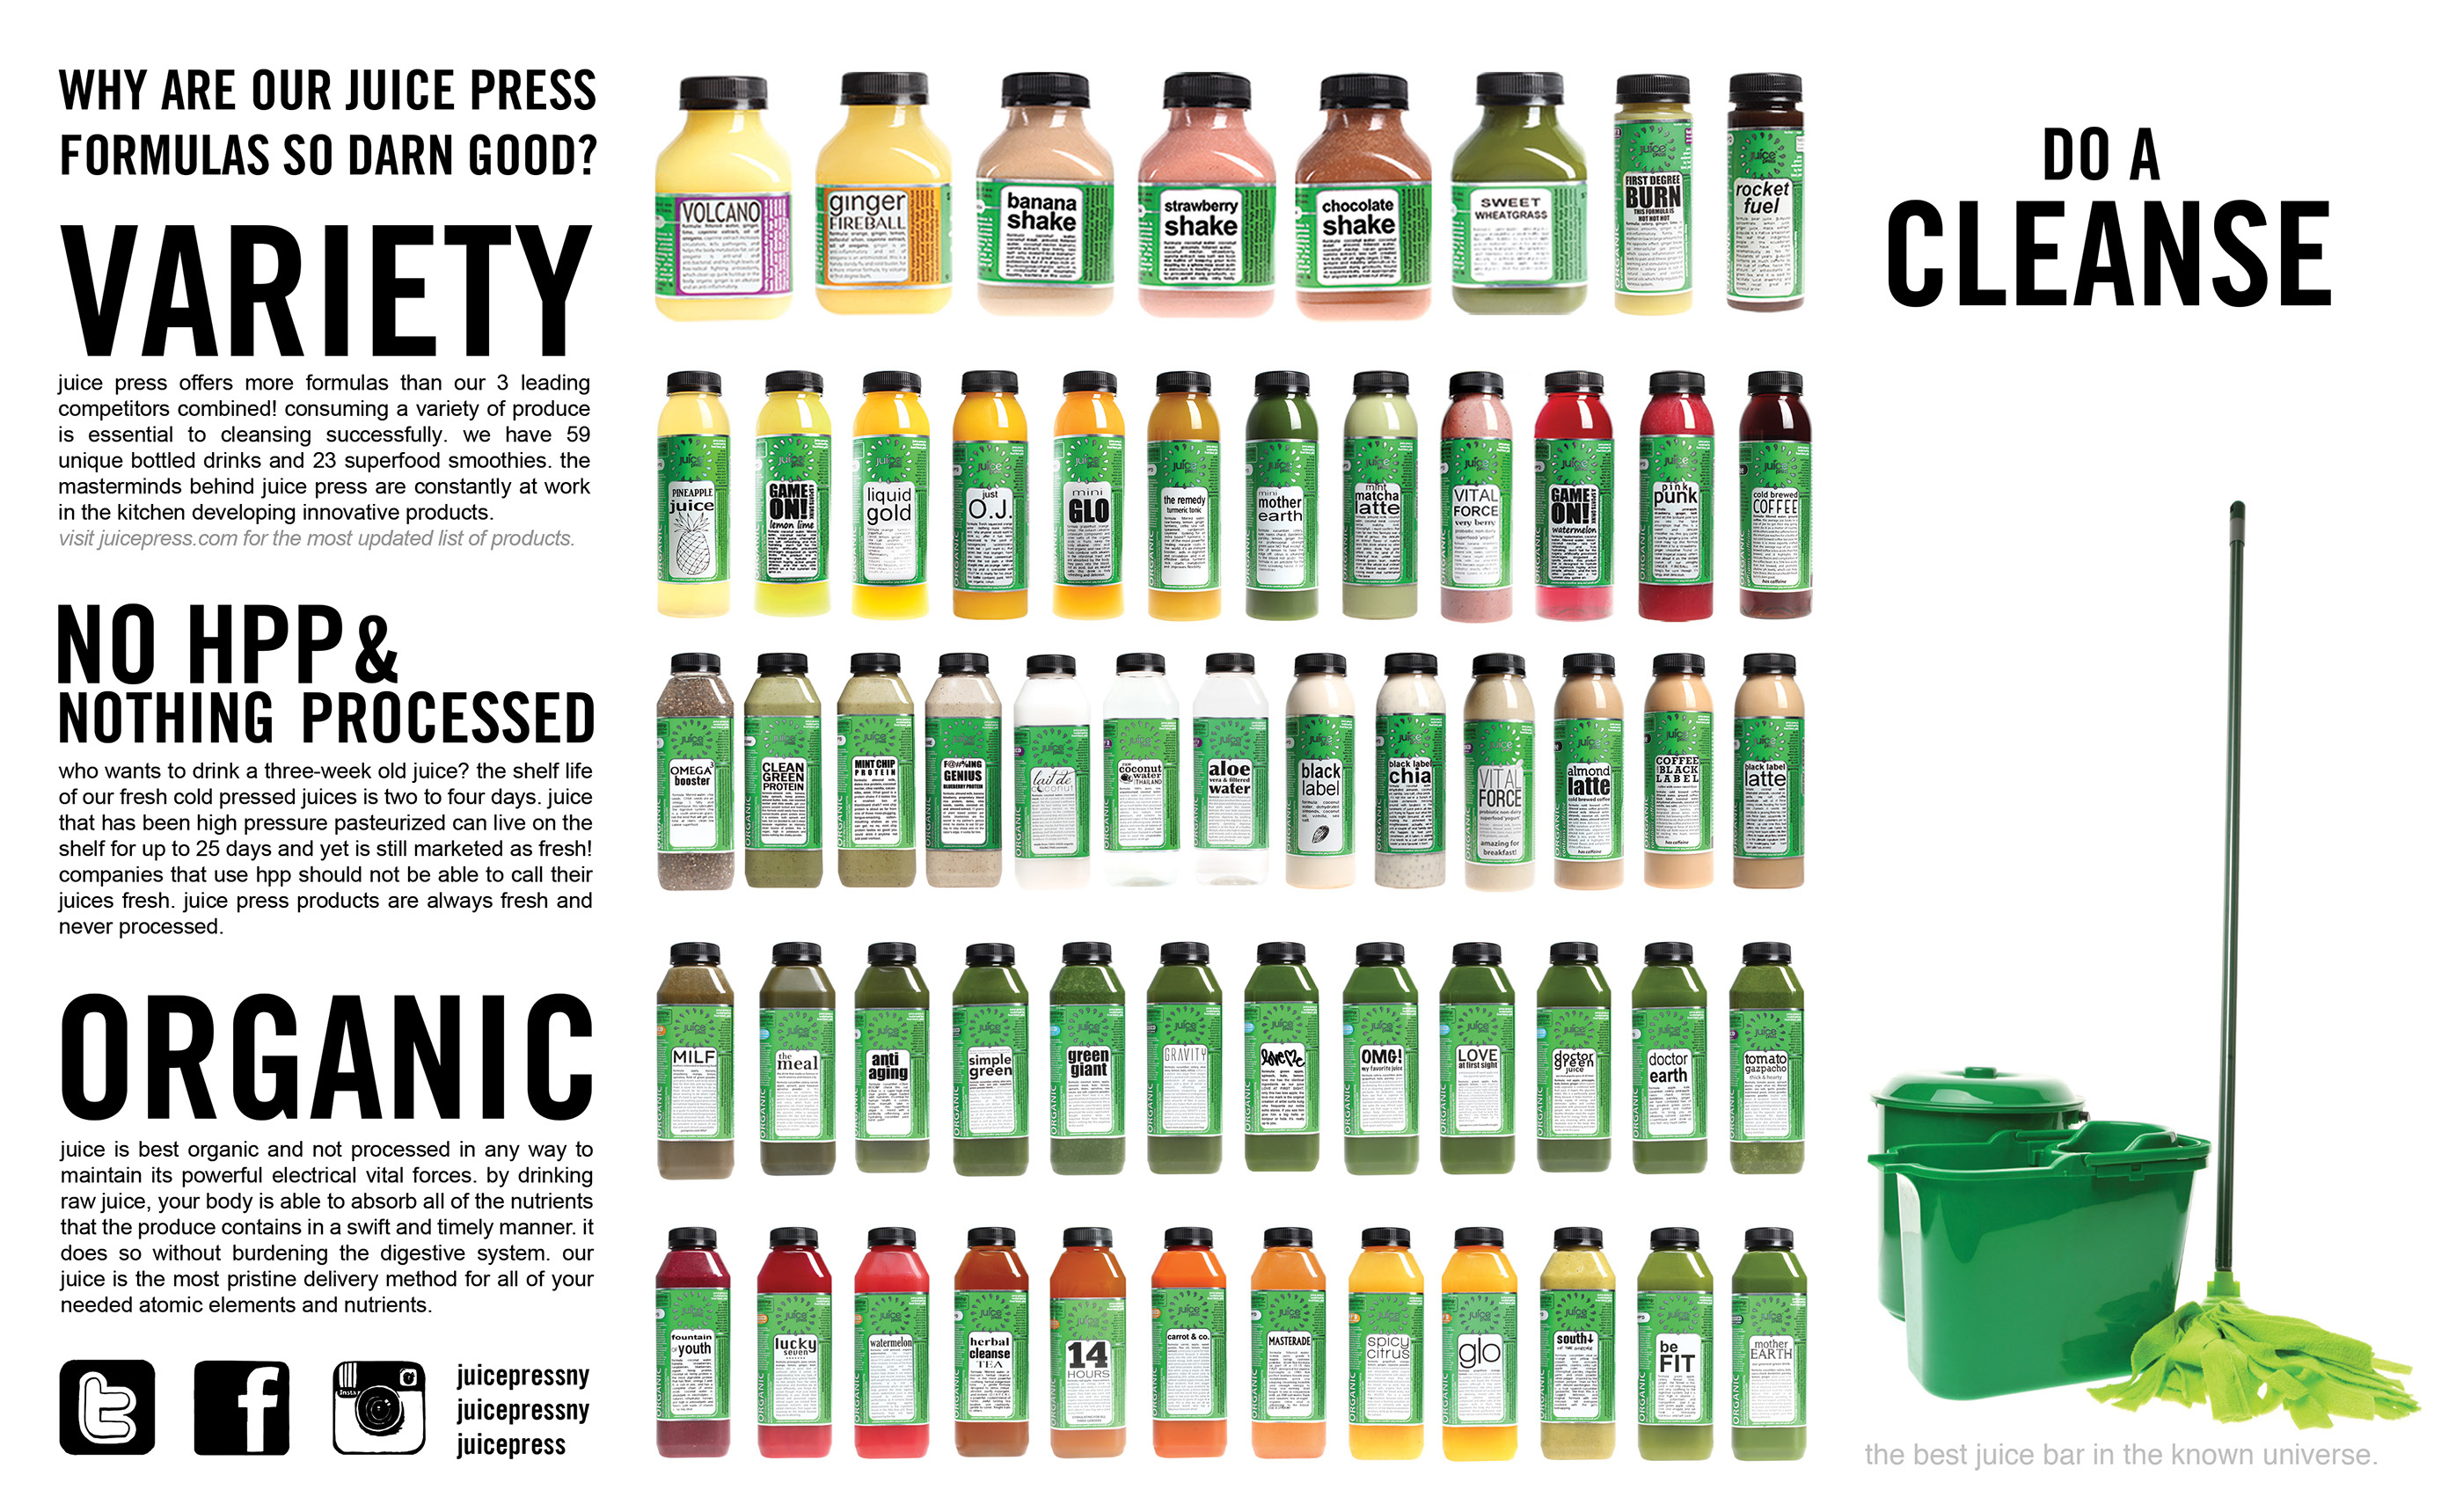 Press products. Juice Press. Juice to Cleanse Essence. Gigantic Juice. WG Shake Force chugging.